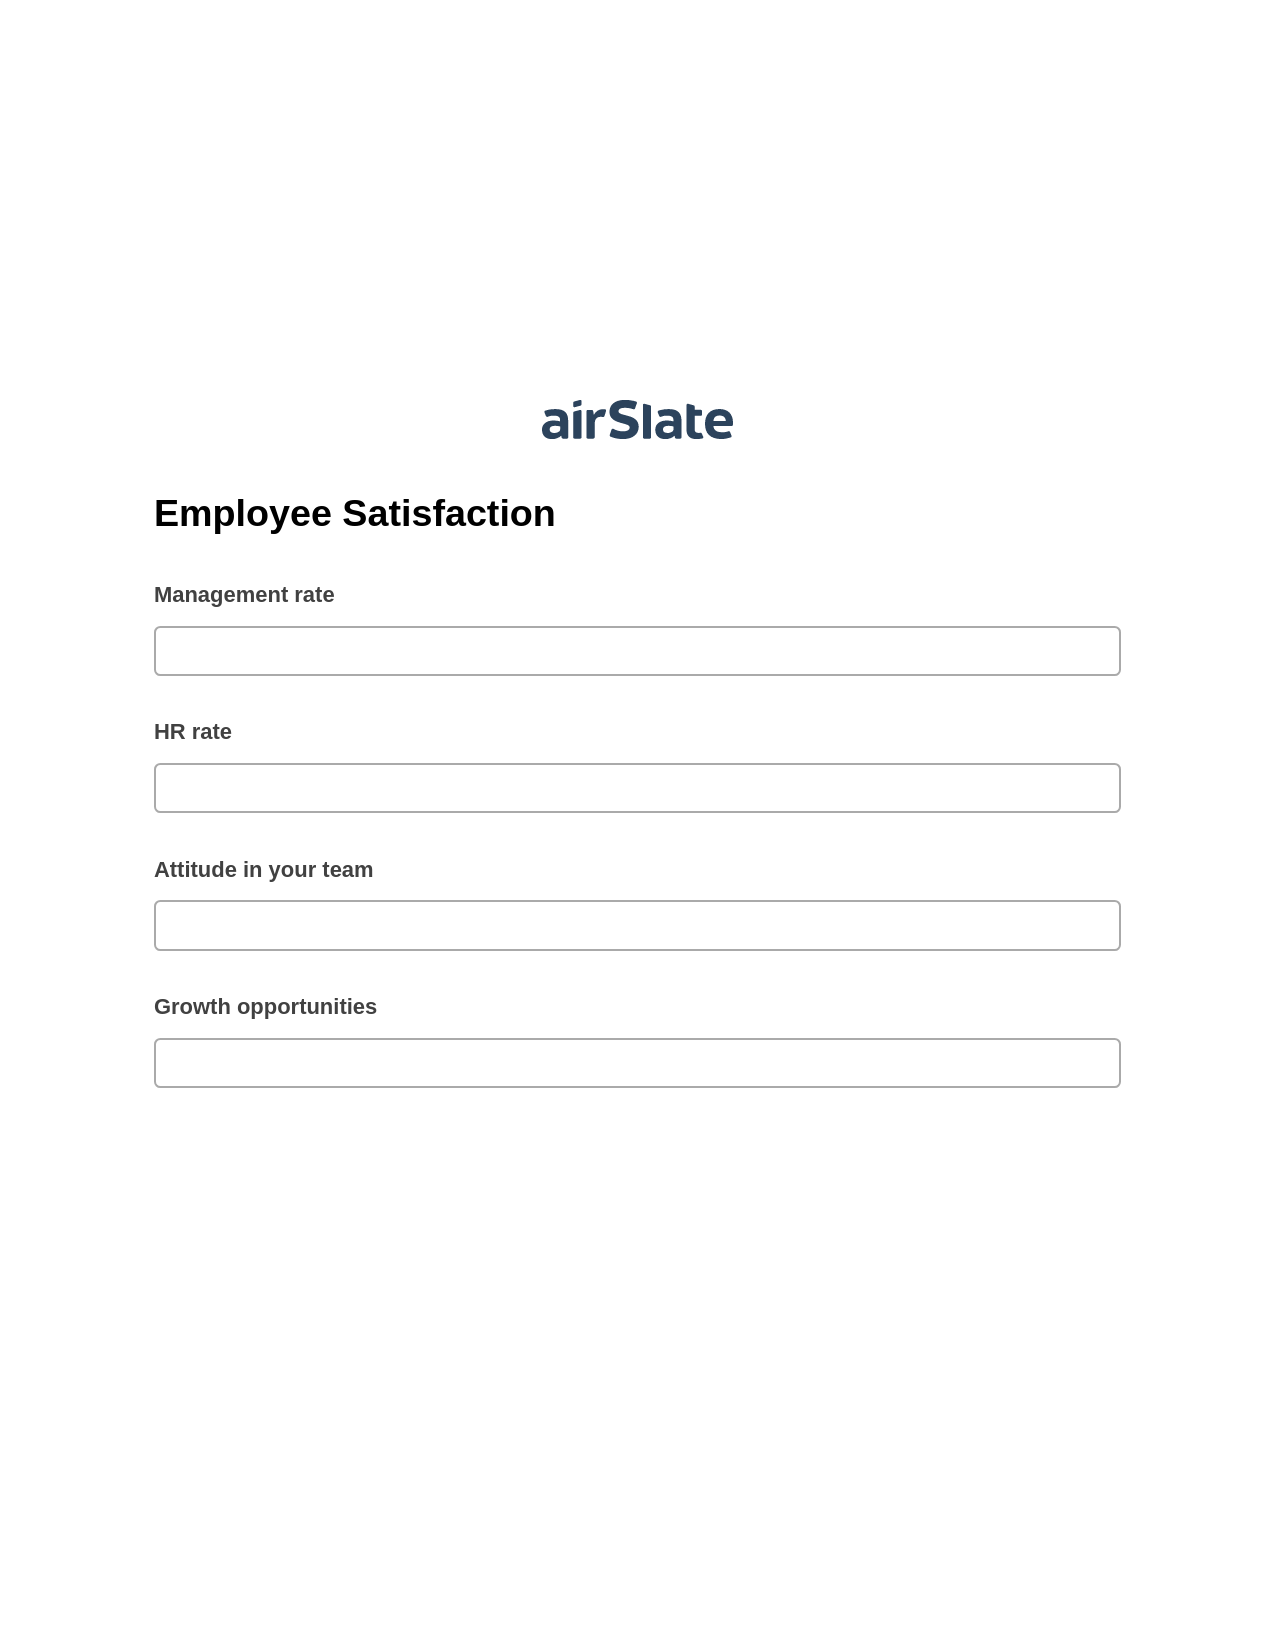 Employee Satisfaction Pre-fill Slate from MS Dynamics 365 Records Bot, Email Notification Bot, Export to Excel 365 Bot